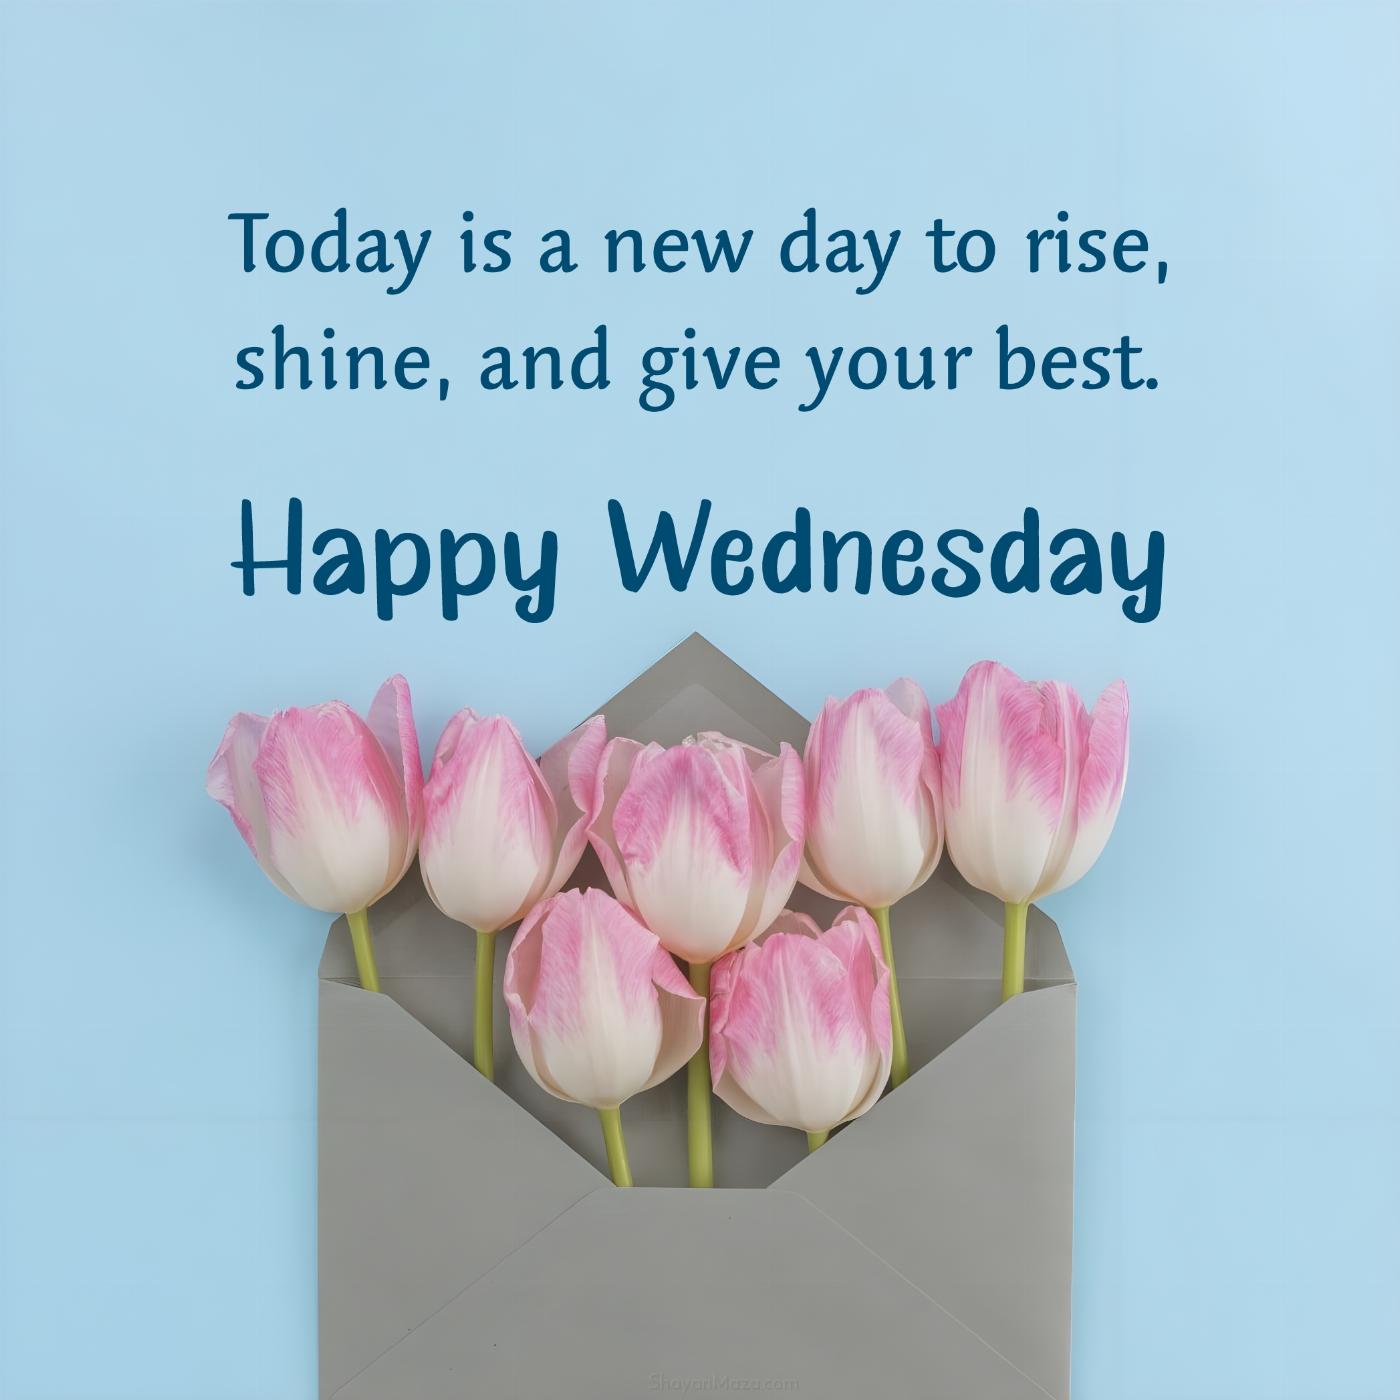 Happy Wednesday! Today is a new day to rise shine